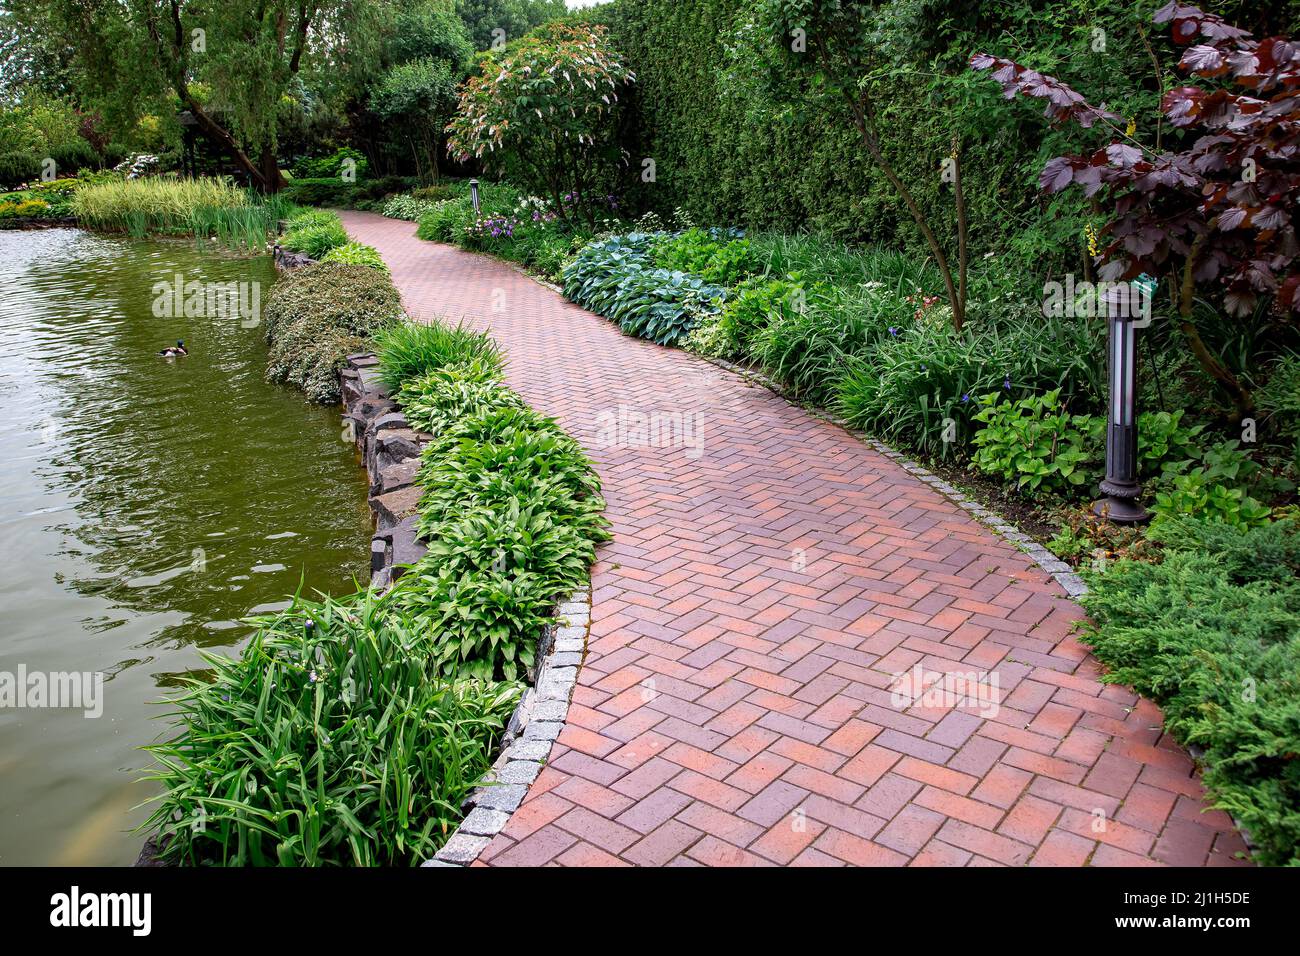 a walking sidewalk paved with brick stone tiles in a park with plants and a decorative pond filled with water, a garden with a flower bed and trees, a Stock Photo